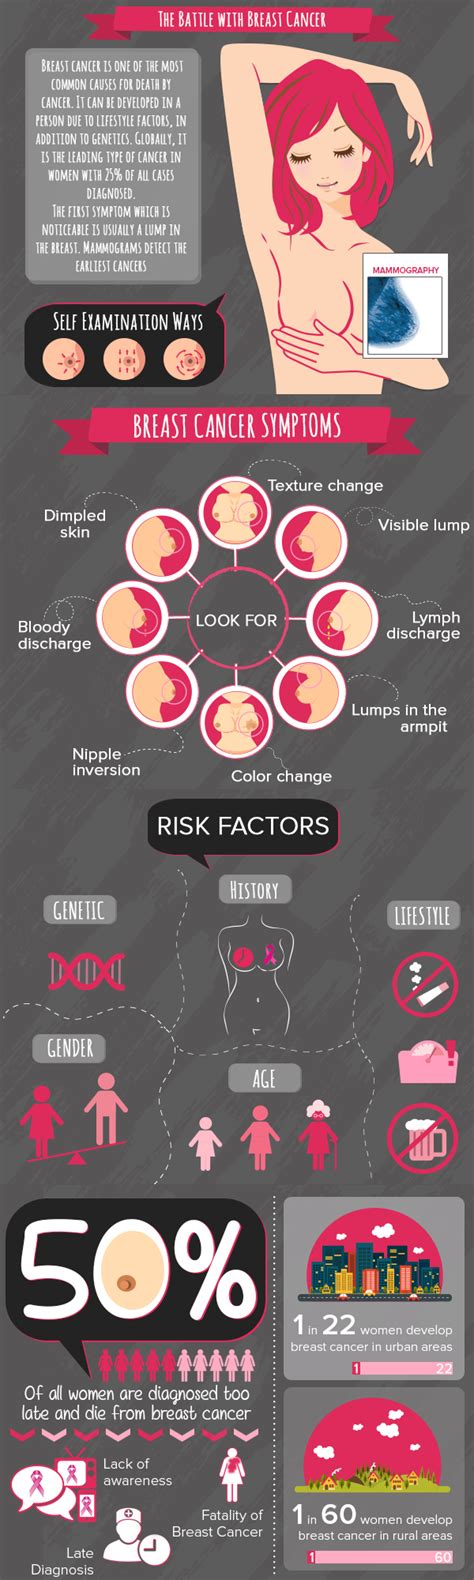 Symptoms Of Breast Cancer Images These Pics Showing The Common Signs Of Breast Cancer Are A